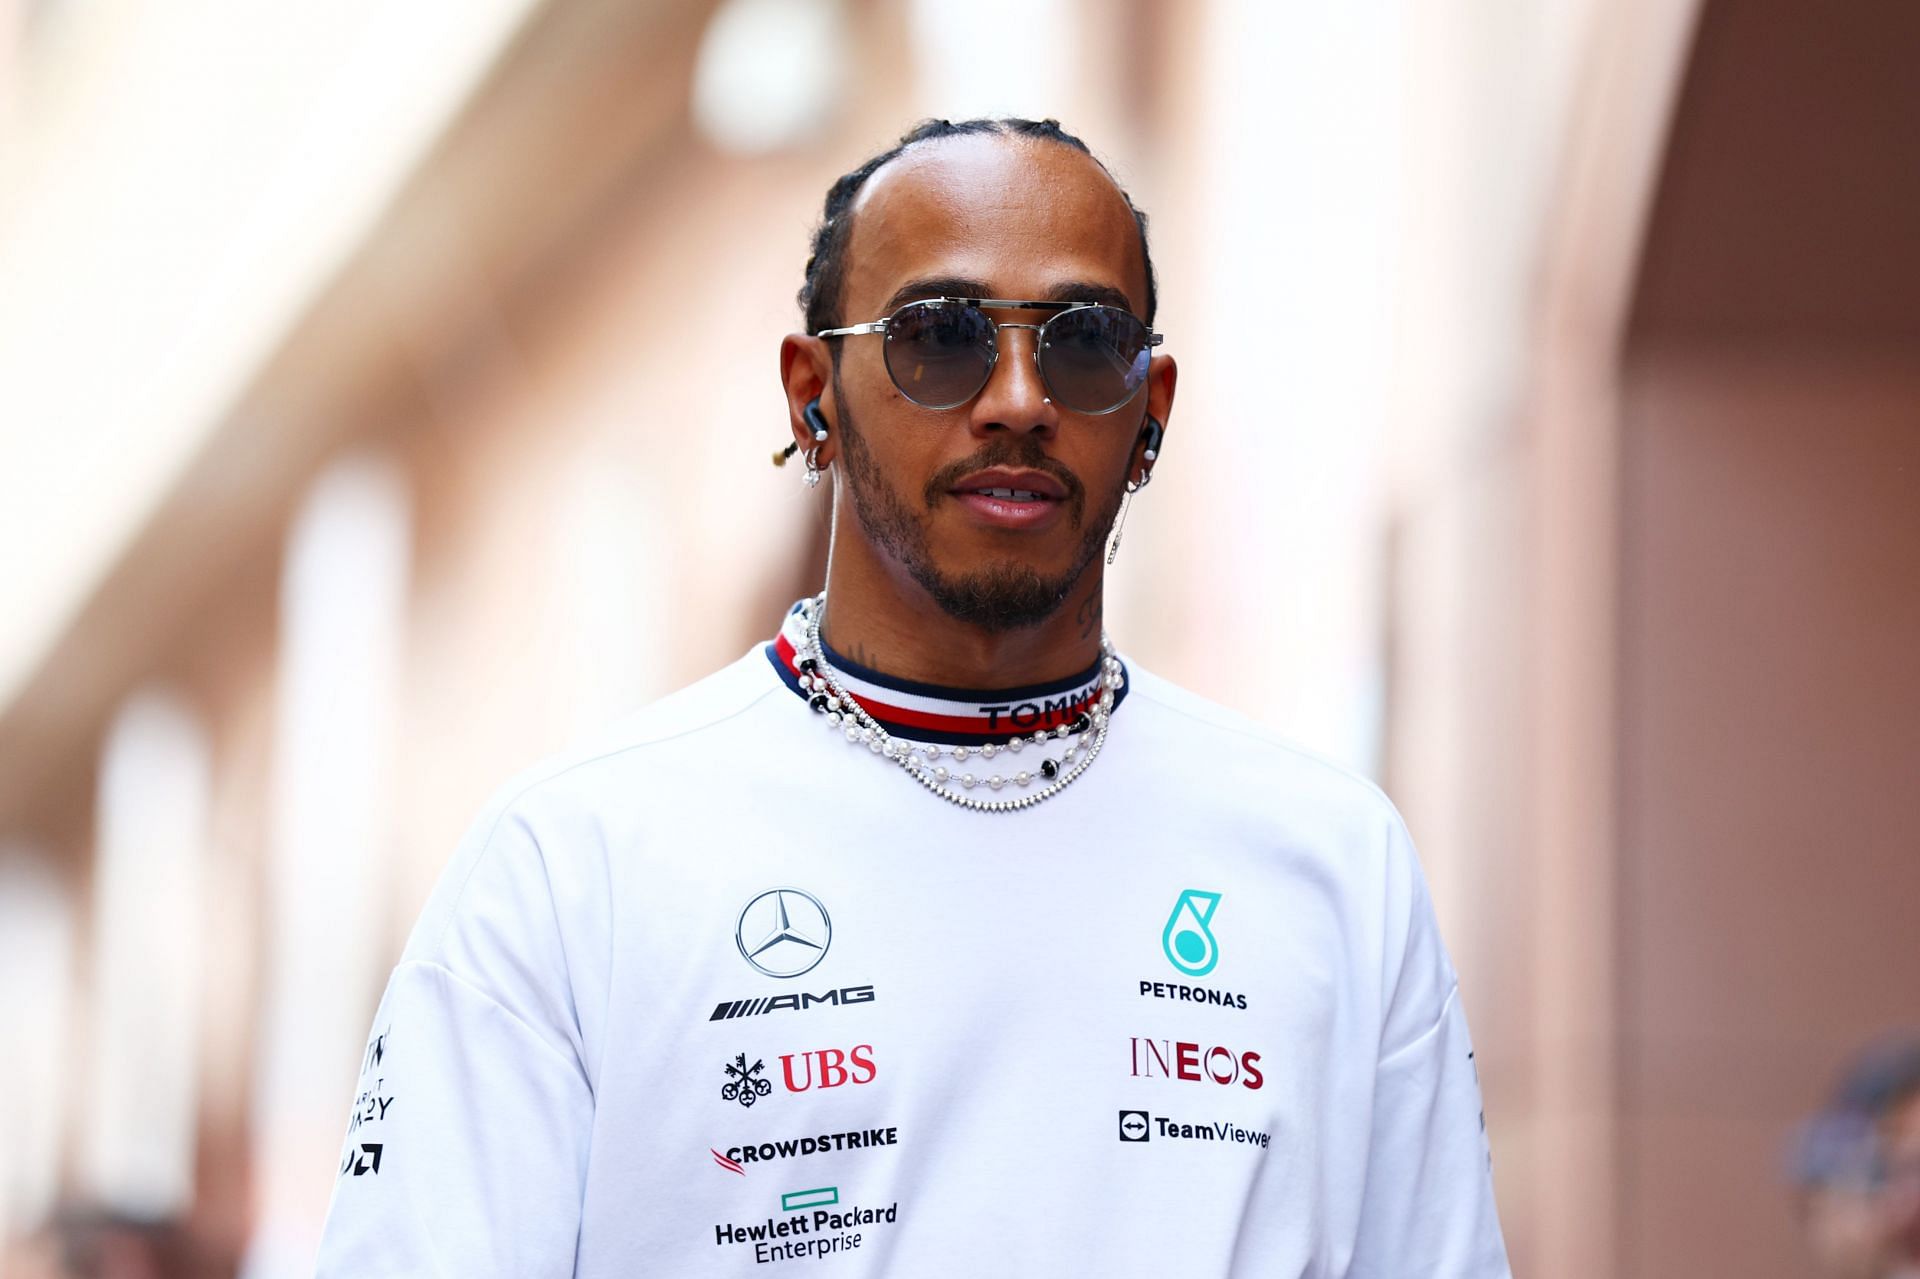 Lewis Hamilton will be one of the co-producers of the racing-themed Hollywood film involving Brad Pitt